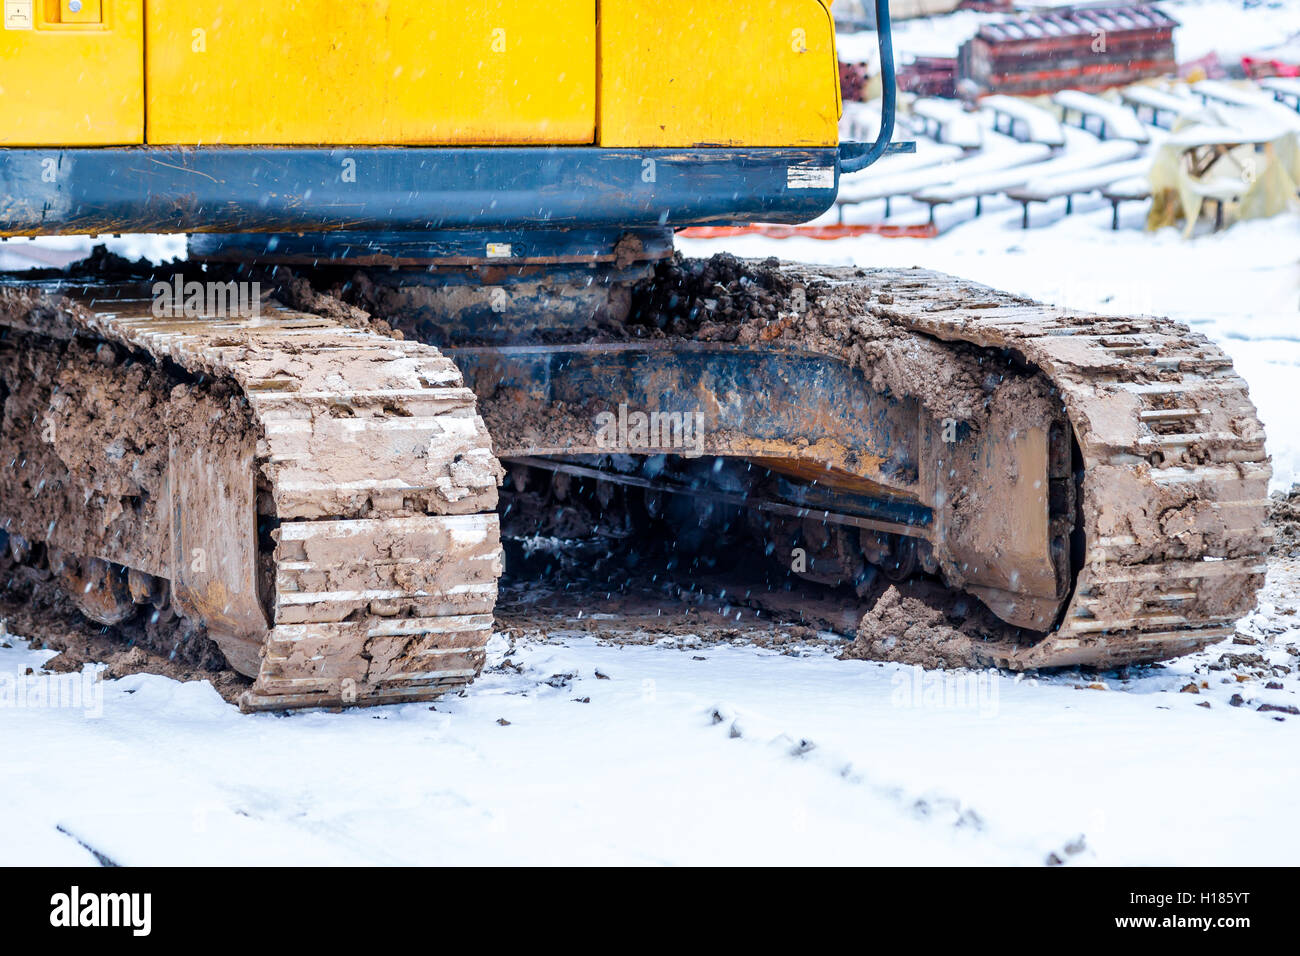 Dirty tracks of a caterpillar chovel which stands on a construction site. Winter season, snow and snowfall Stock Photo